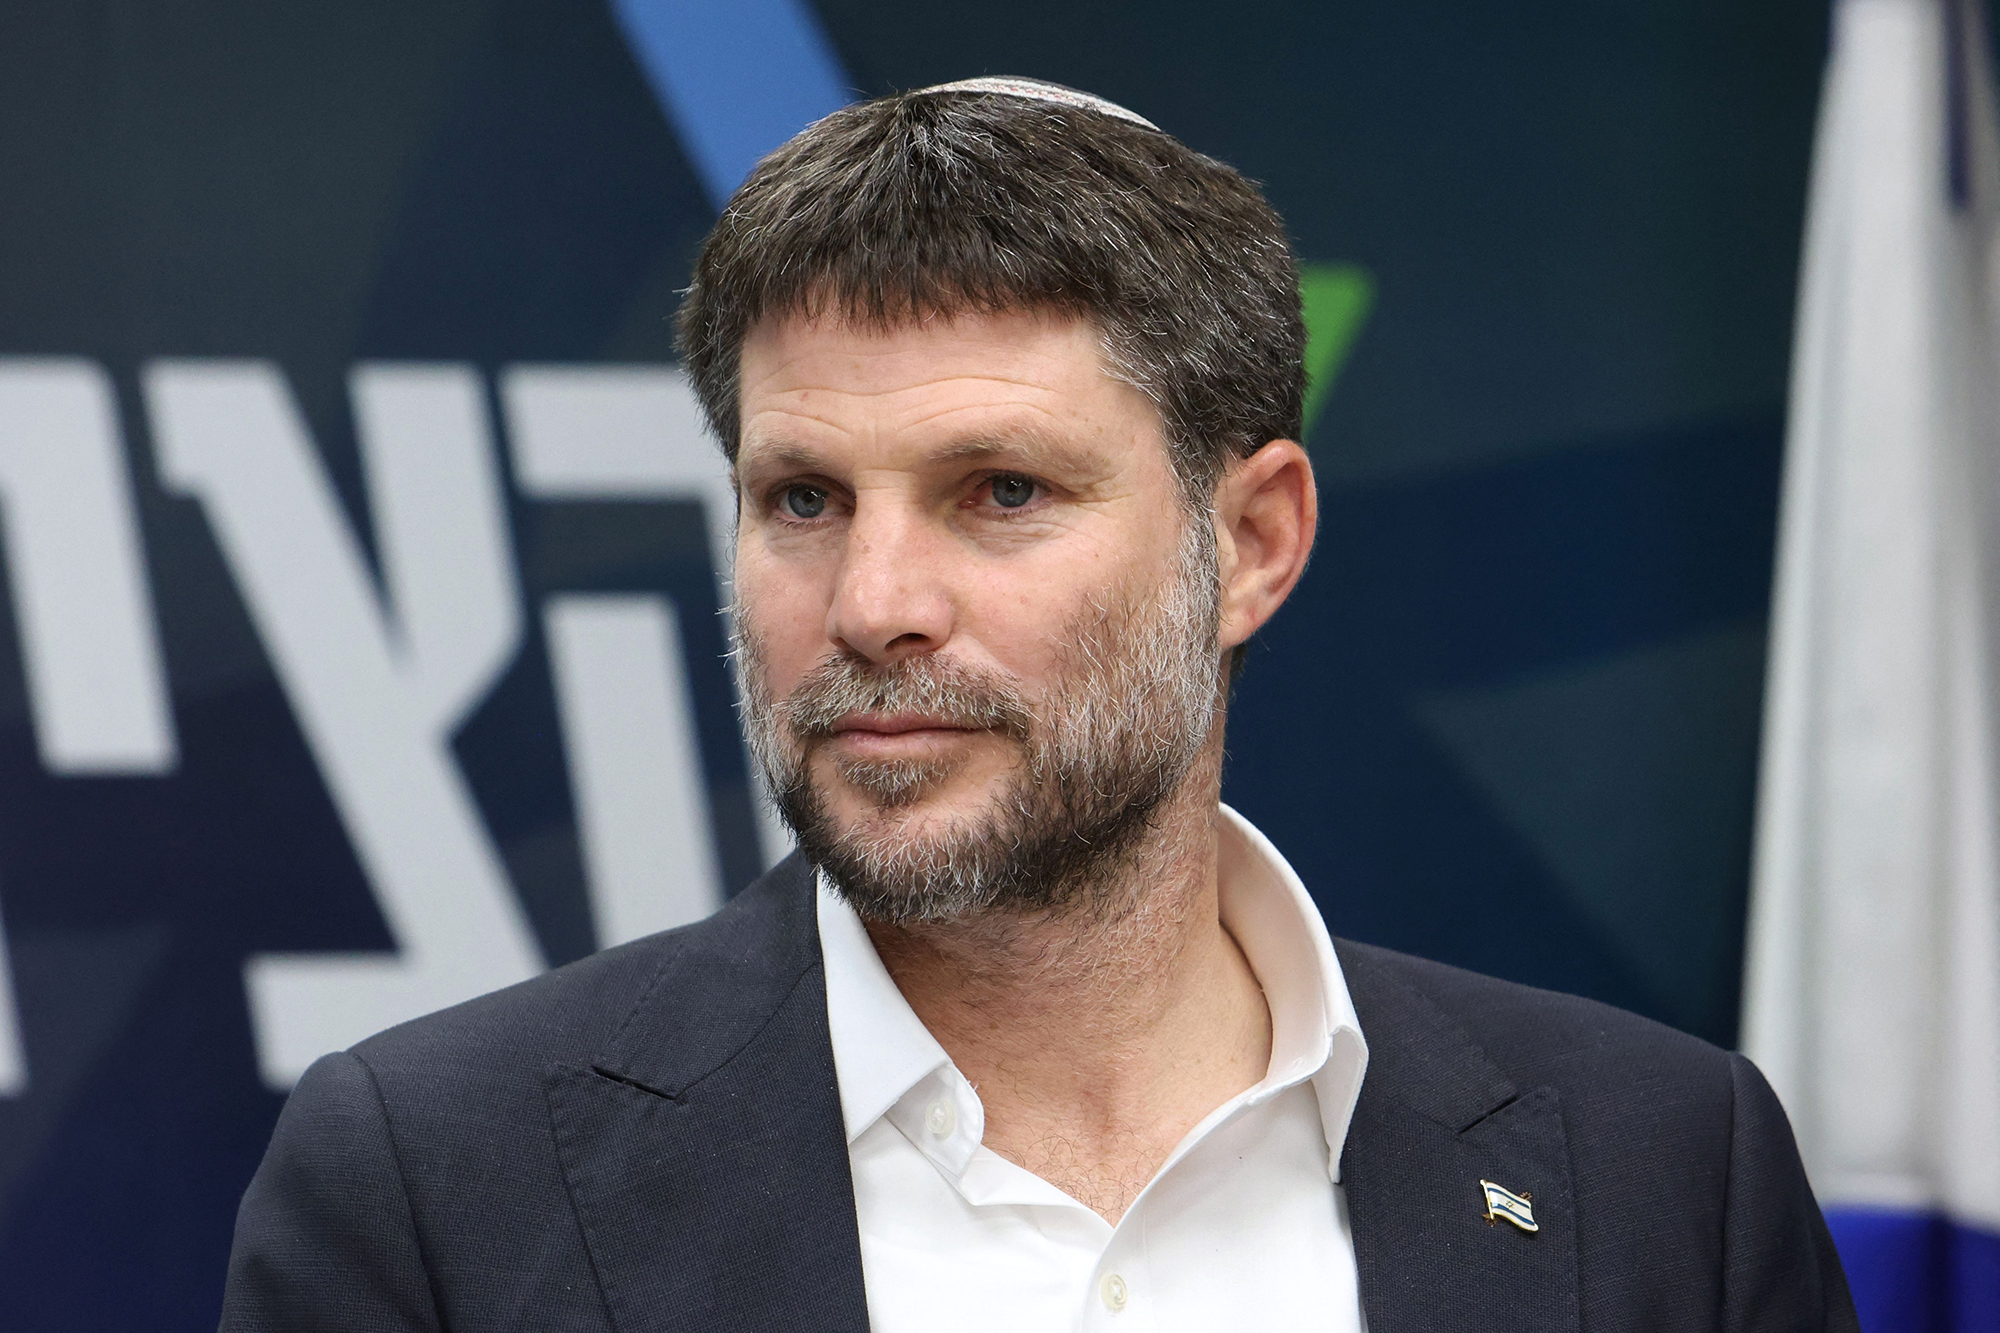 Israel's Finance Minister Bezalel Smotrich attends a meeting at the parliament in Jerusalem on March 20.